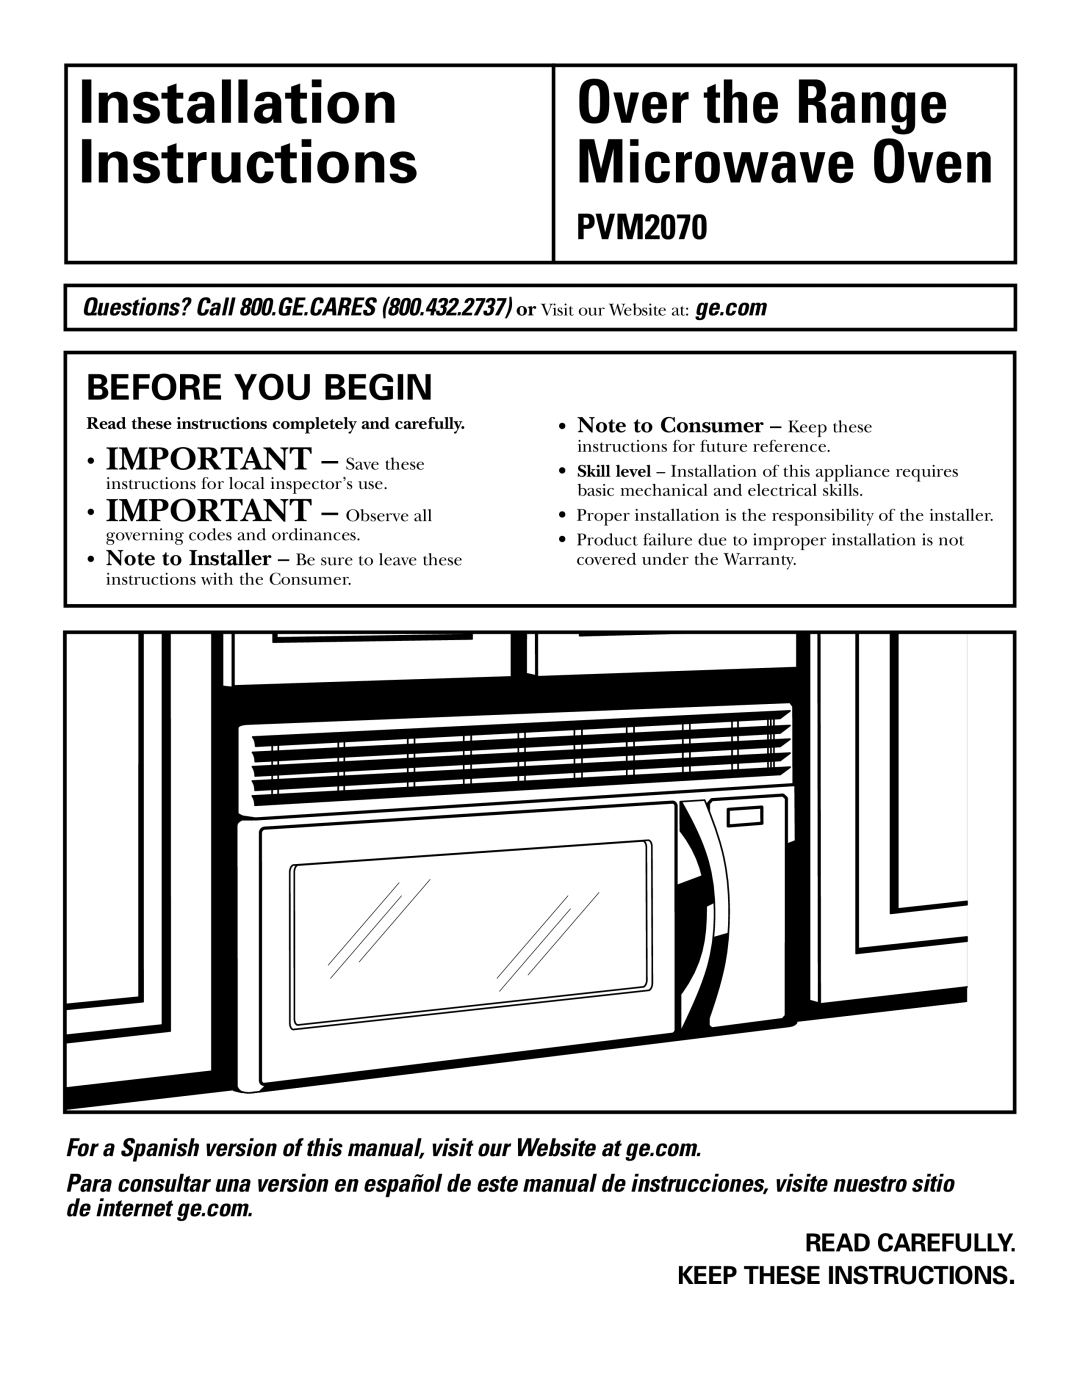 GE PVM2070 warranty Installation Instructions, Before You Begin, IMPORTANT - Save these, IMPORTANT - Observe all 